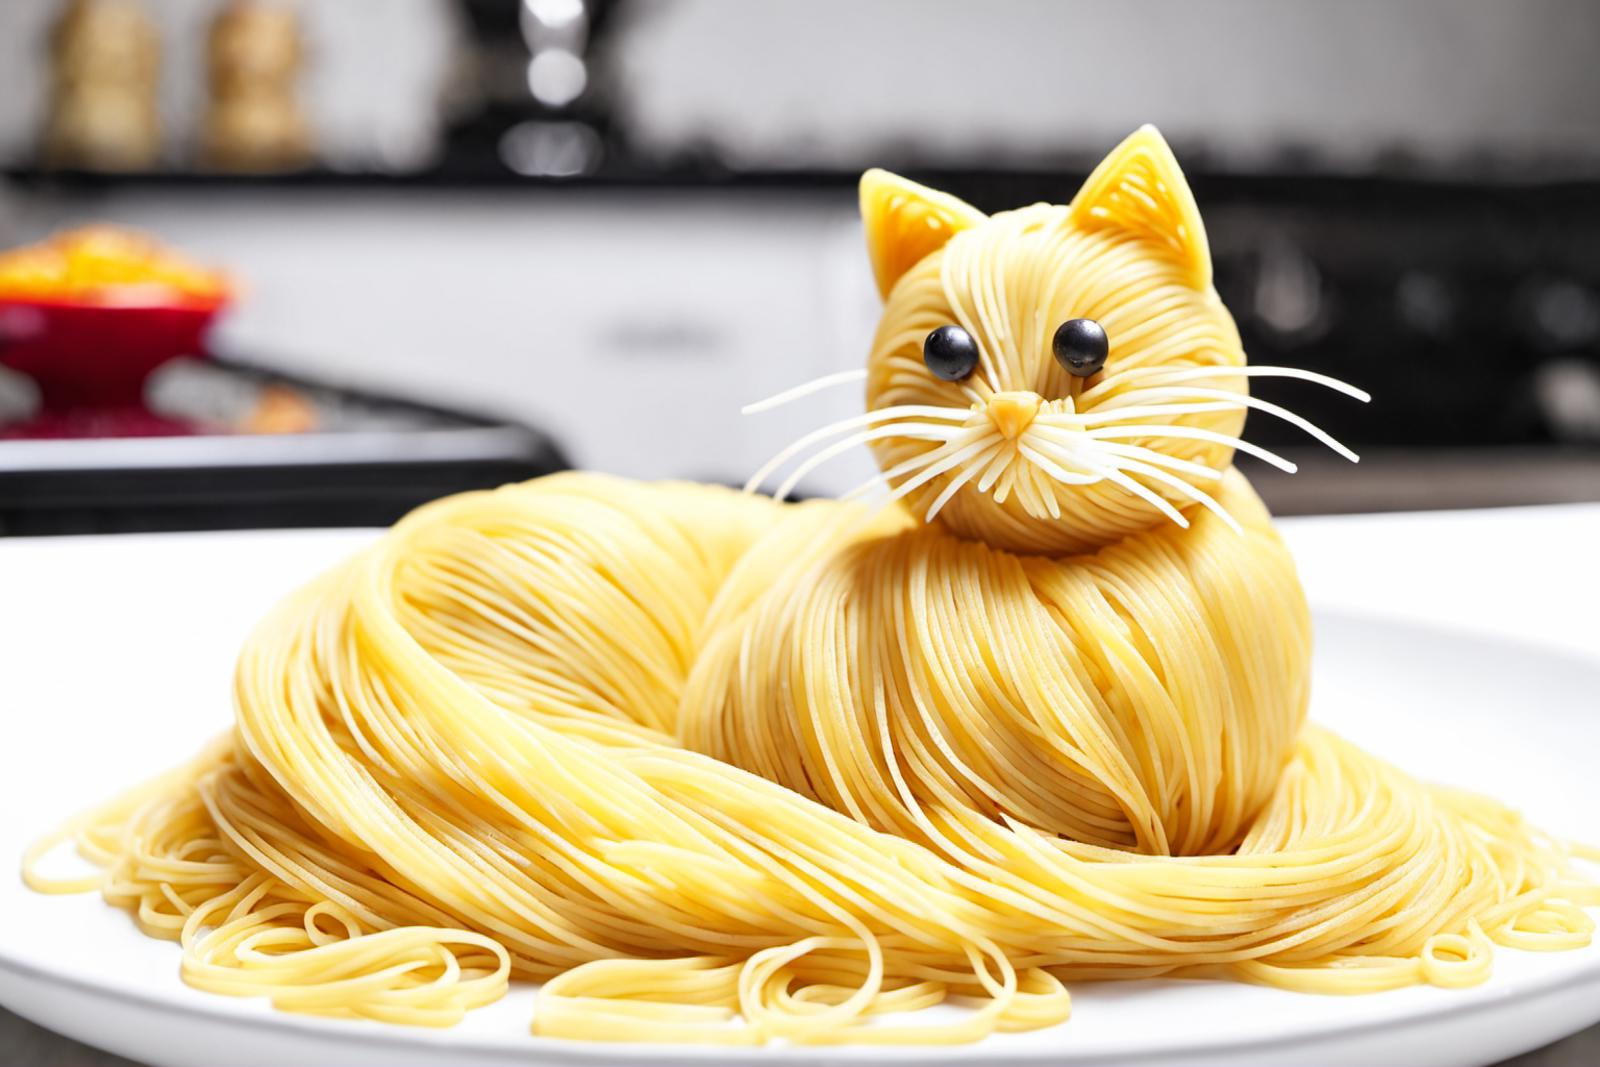 A Pasta Cat Sculpture on a Plate with Yellow Noodles